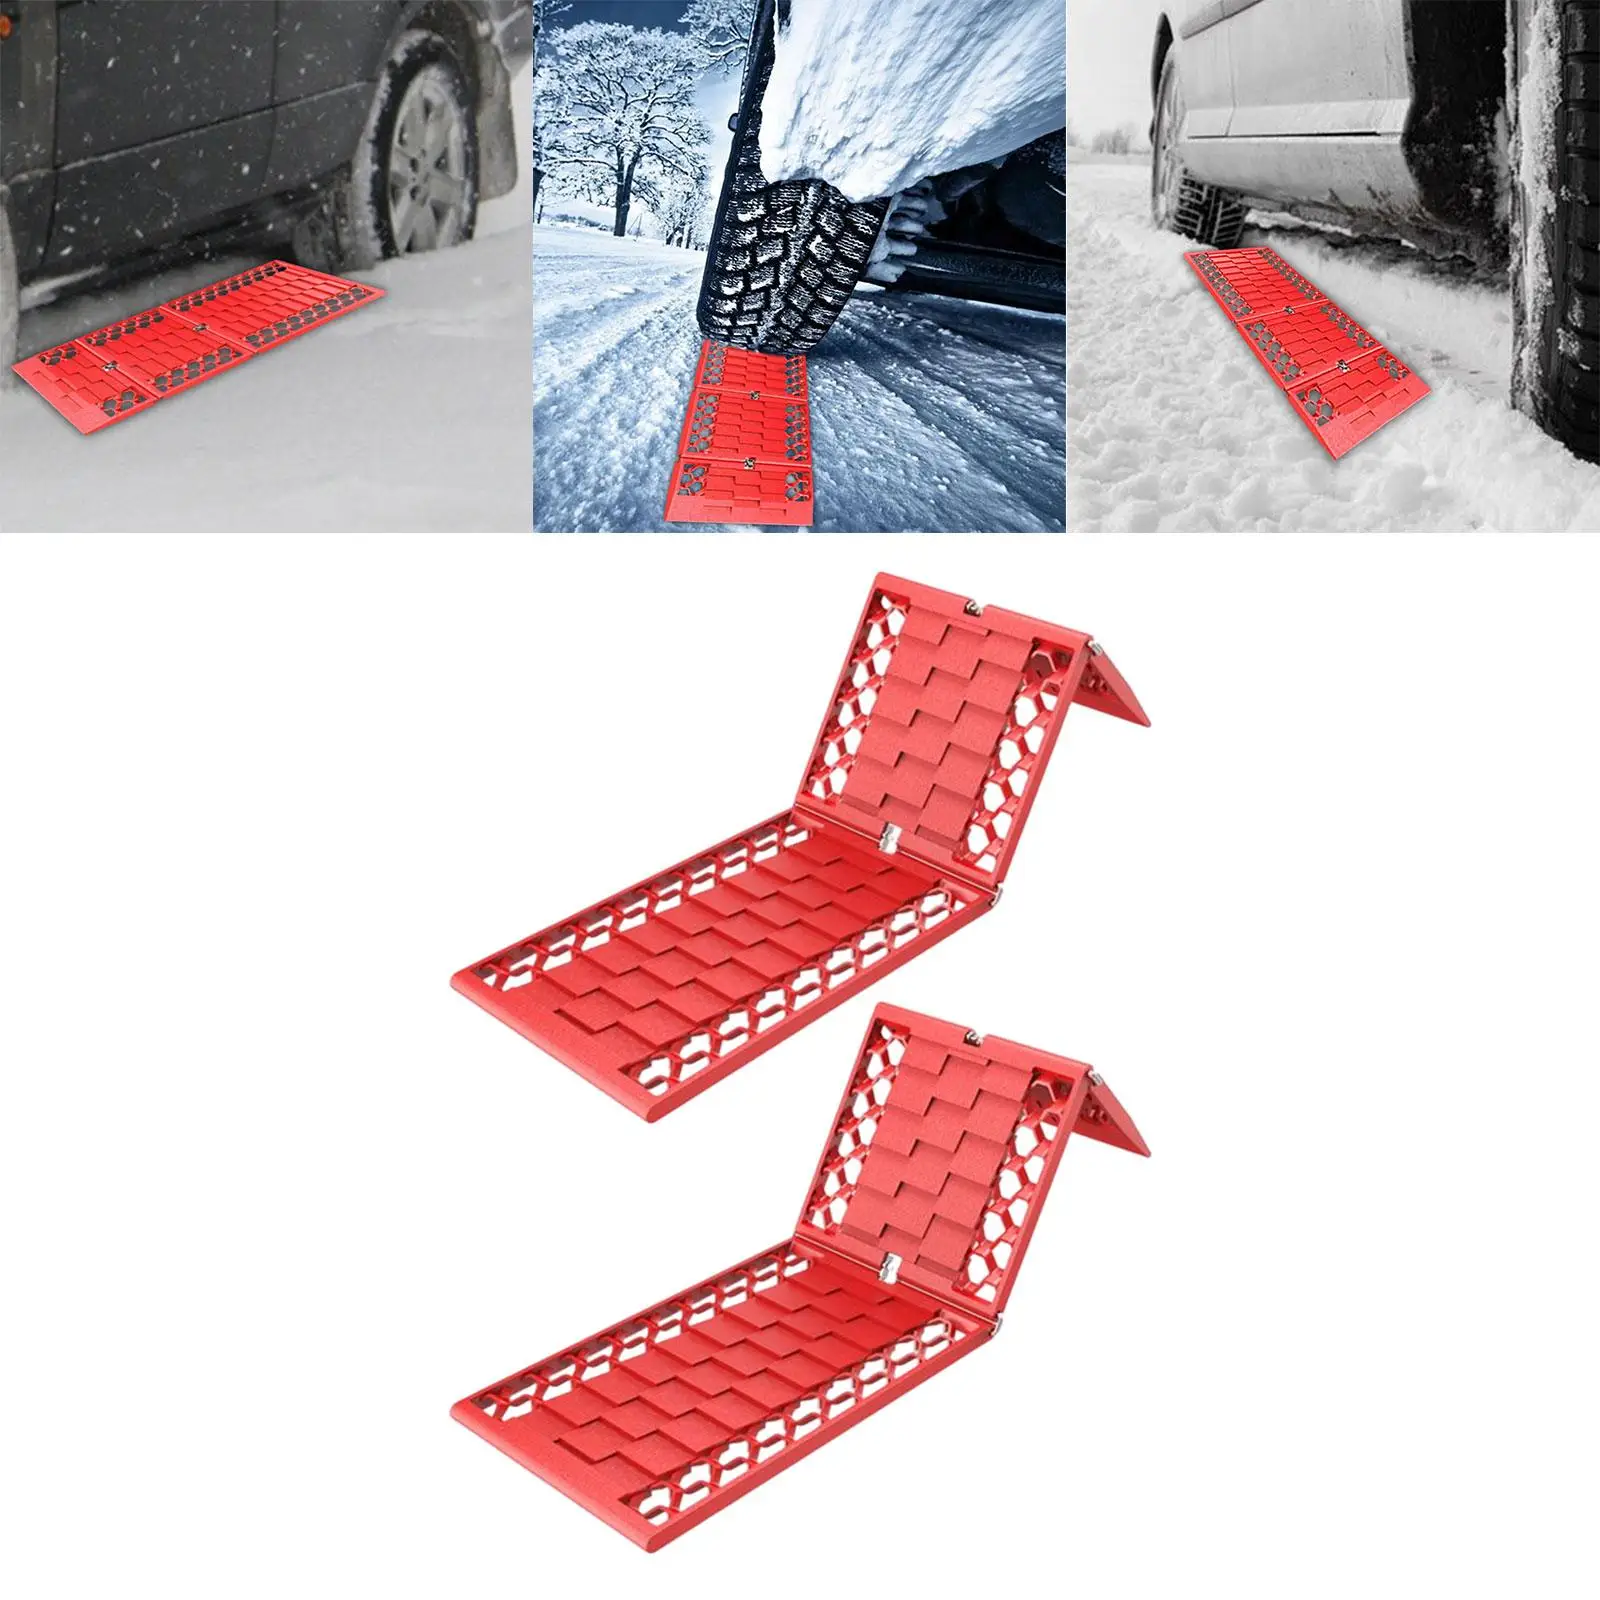 2 Pieces Folding off roading traction track Nonslip Plate Tyre Emergency Mat Traction Boards for Sand Soft Ground Terrains Ice